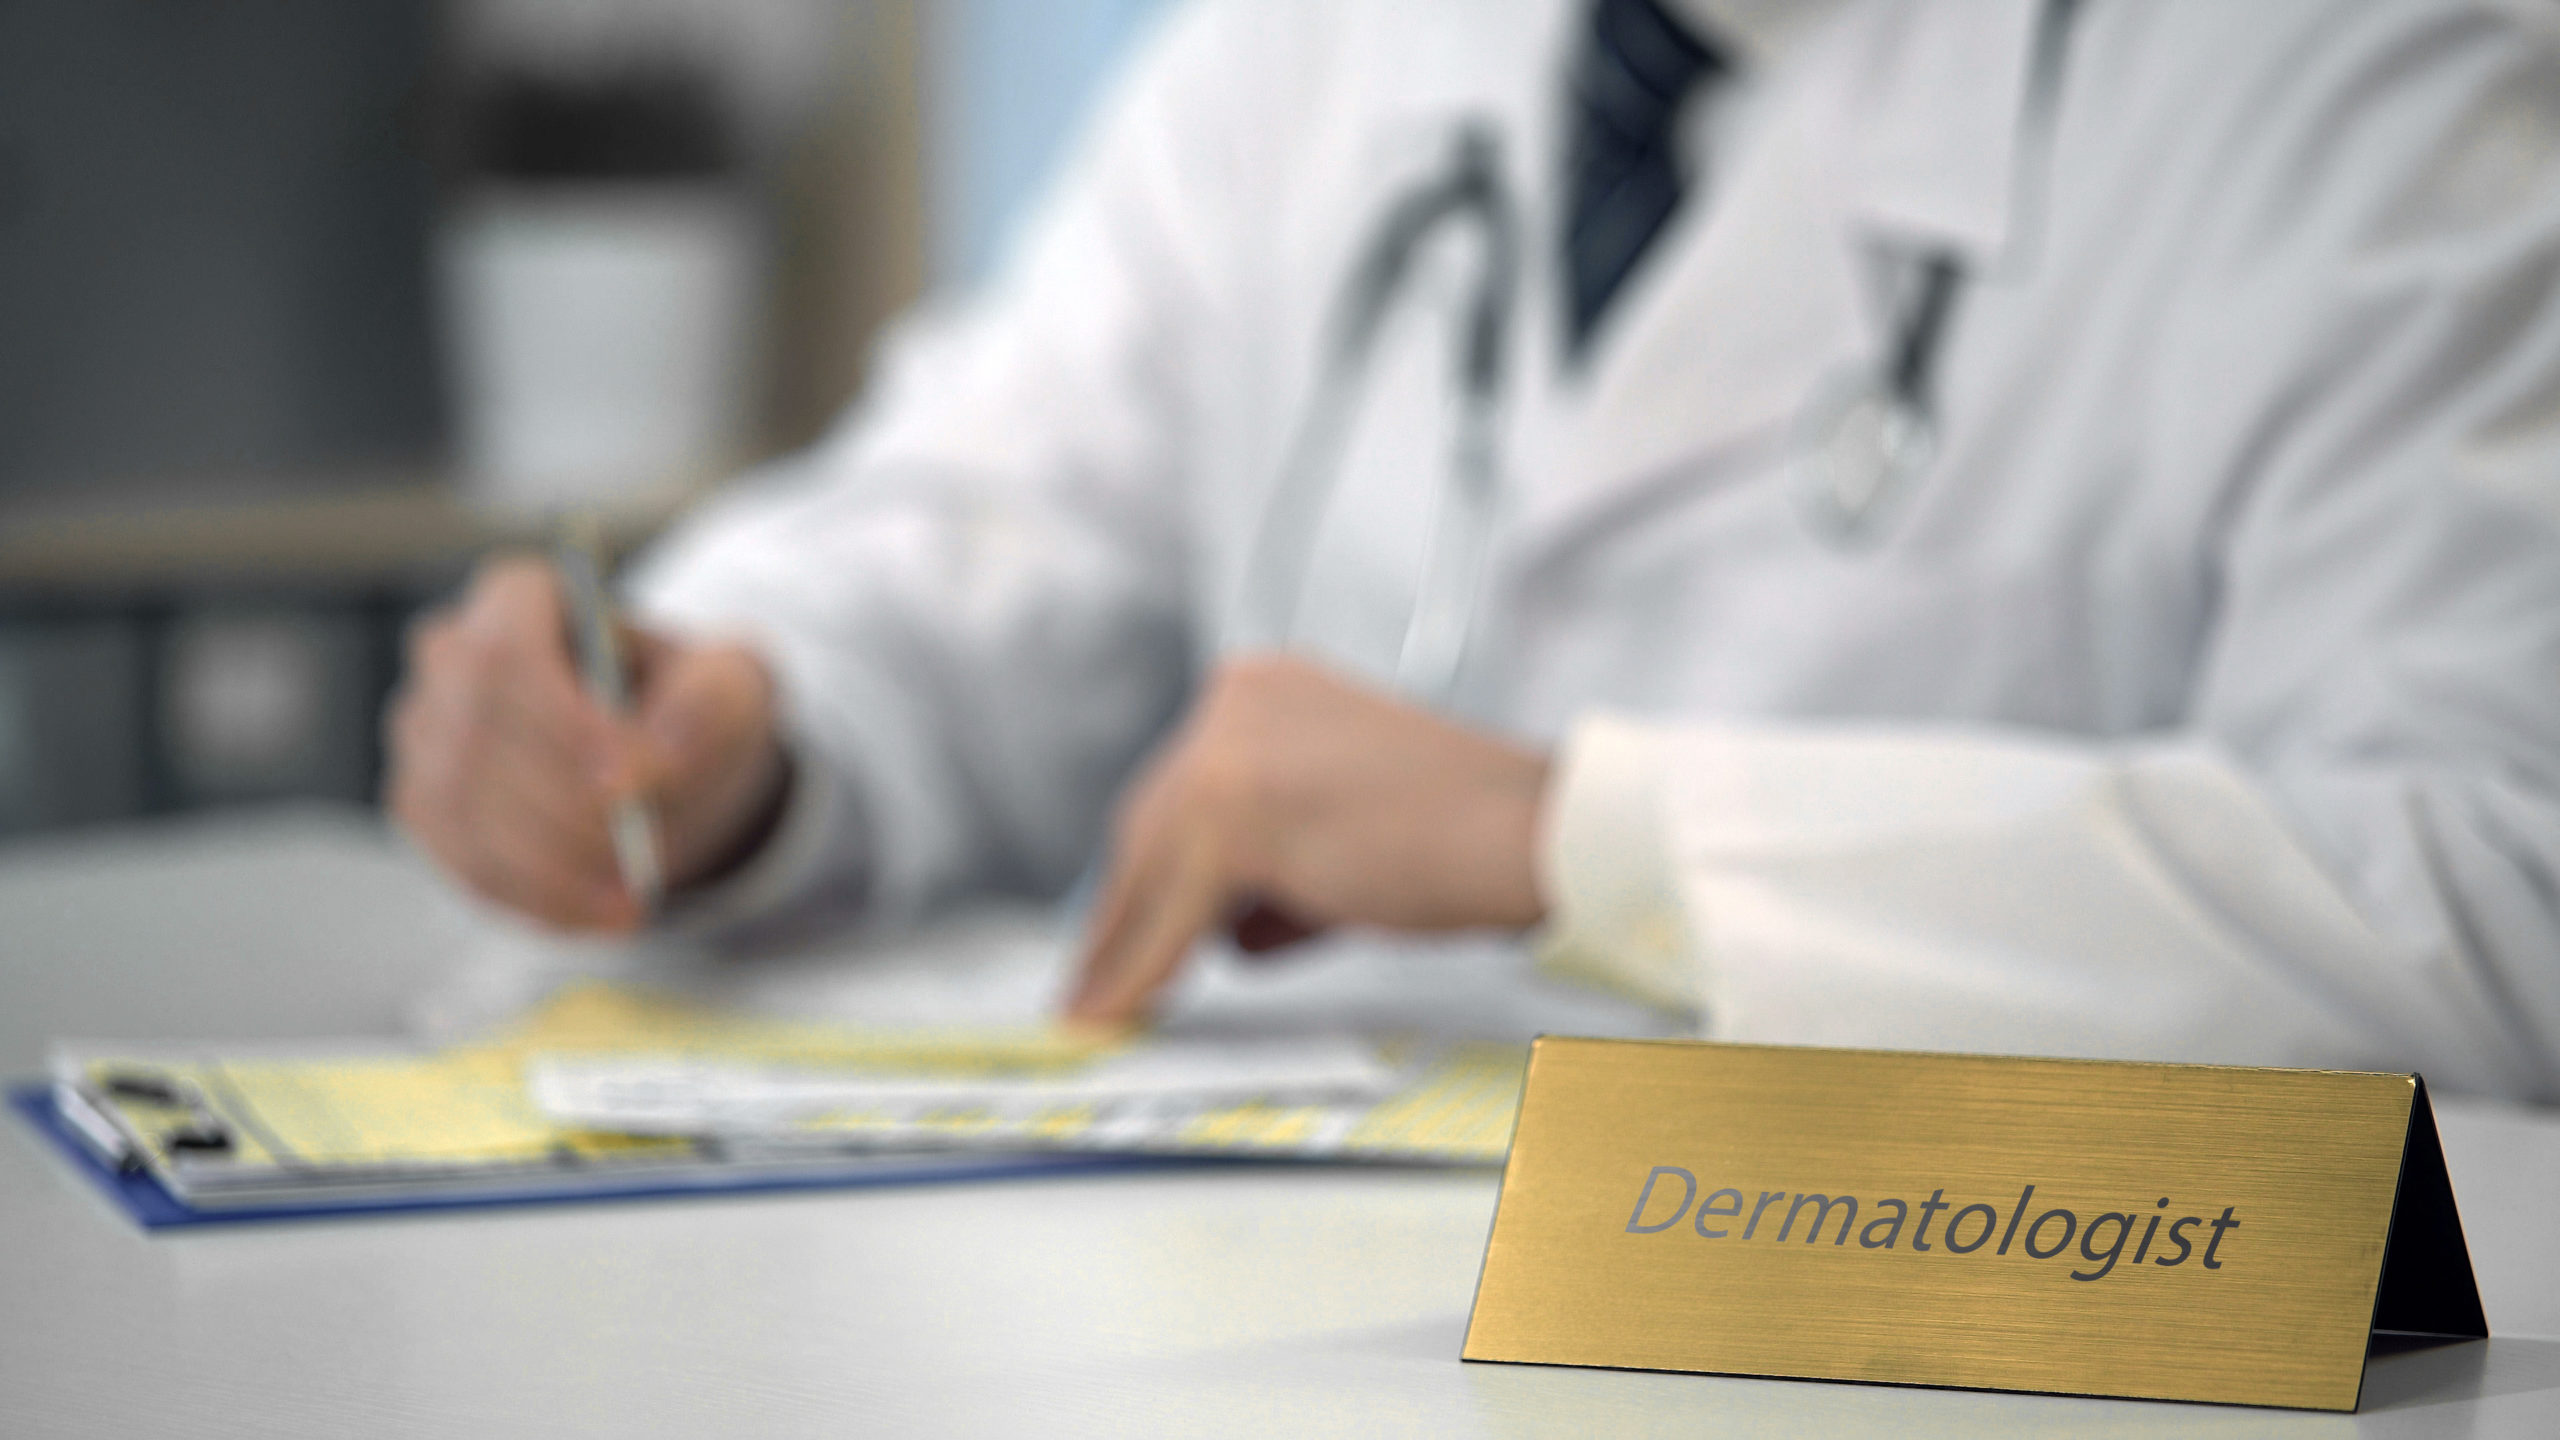 How To Become A Dermatologist: Training, Licensing, and Certification Requirements